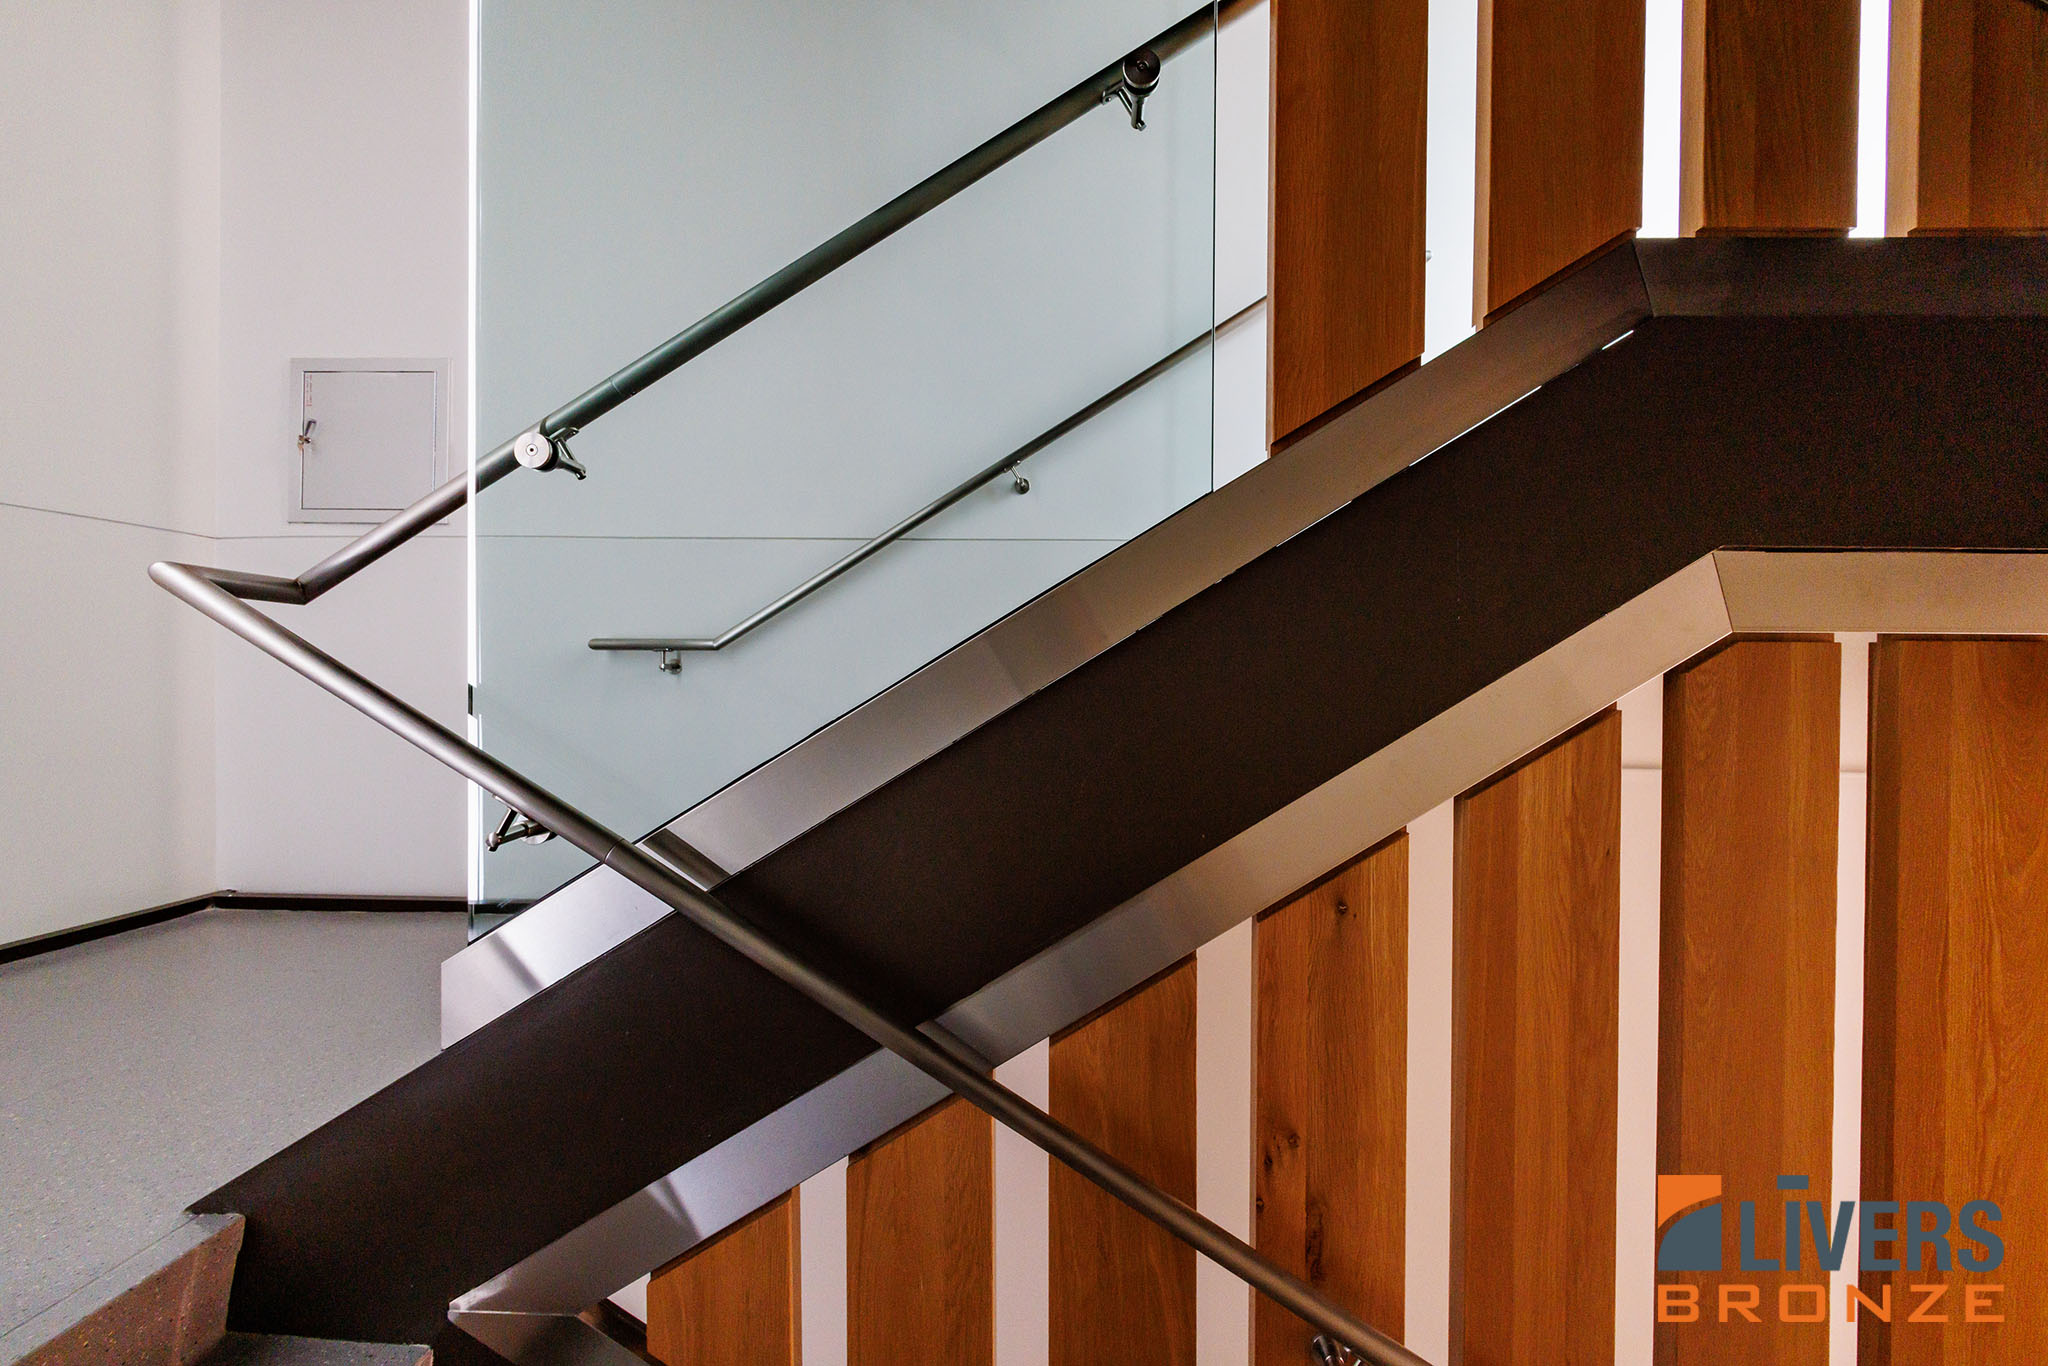 Livers Bronze Struct-U-Rail Commercial Glass Railing System was installed in the interior stairway at Lehigh University's Health, Science & Technology Building and is Made in the USA.